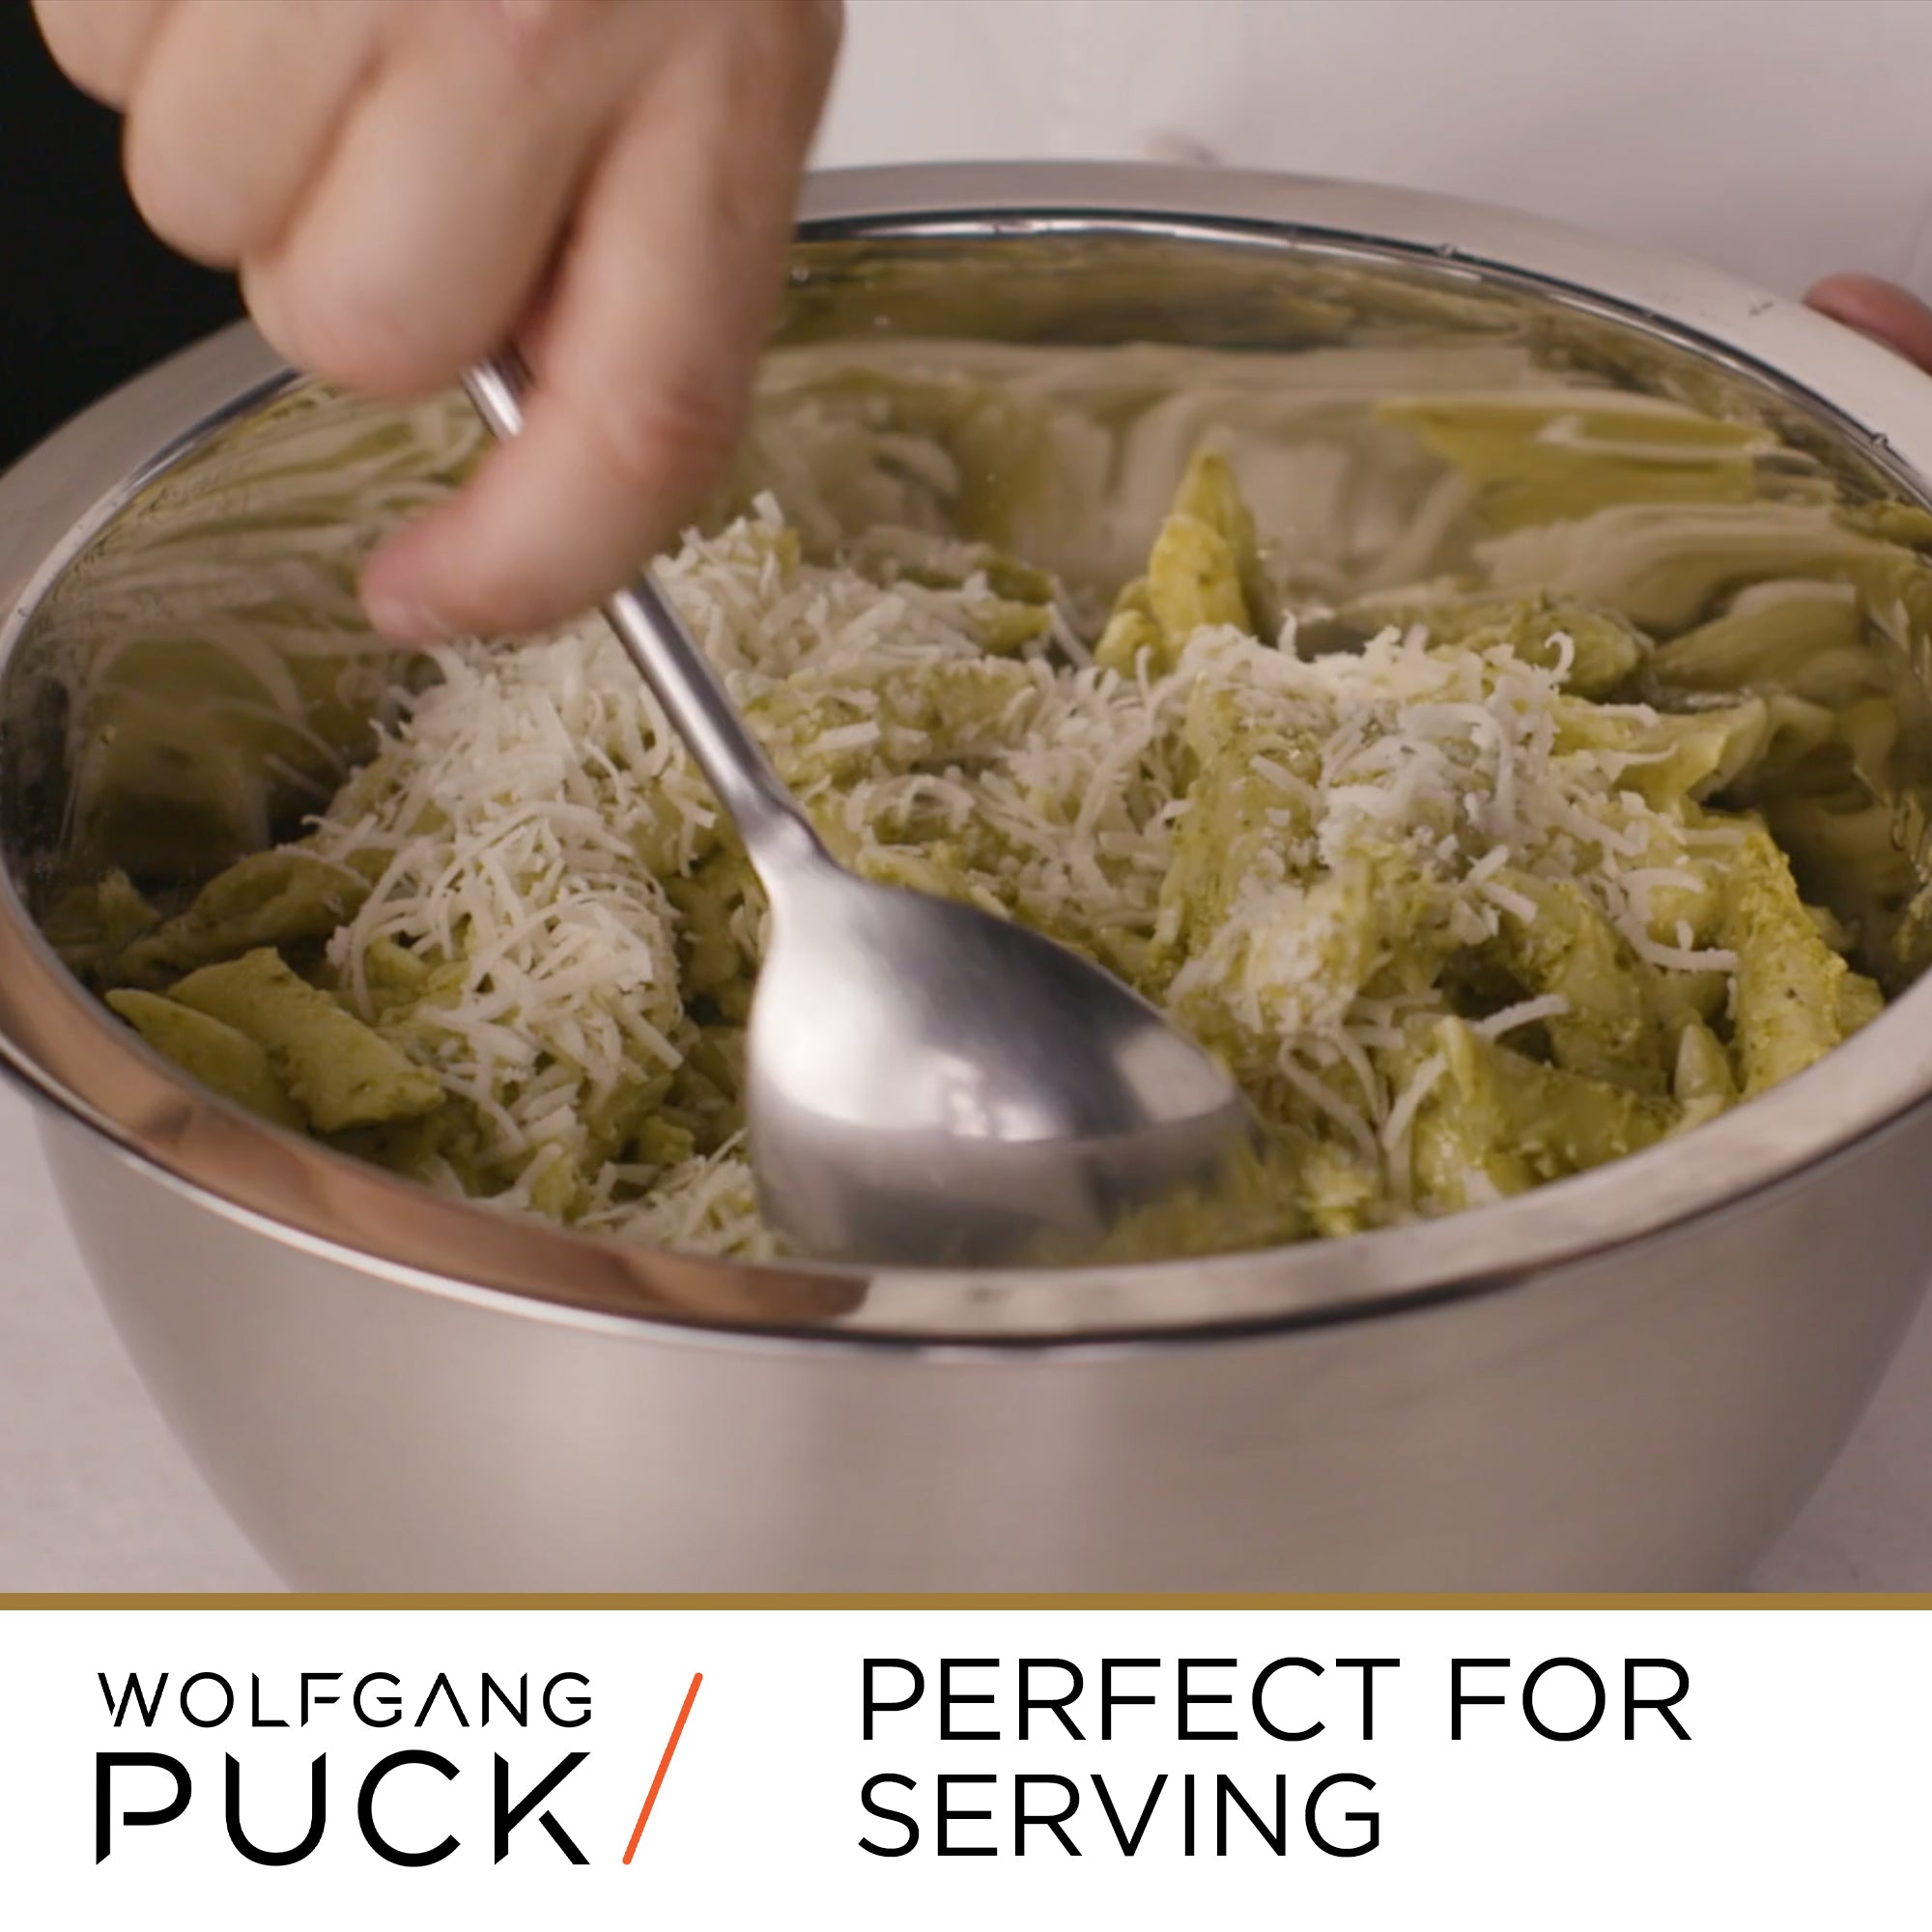 Wolfgang Puck 6-Piece Mixing Bowls Set (Stainless Steel